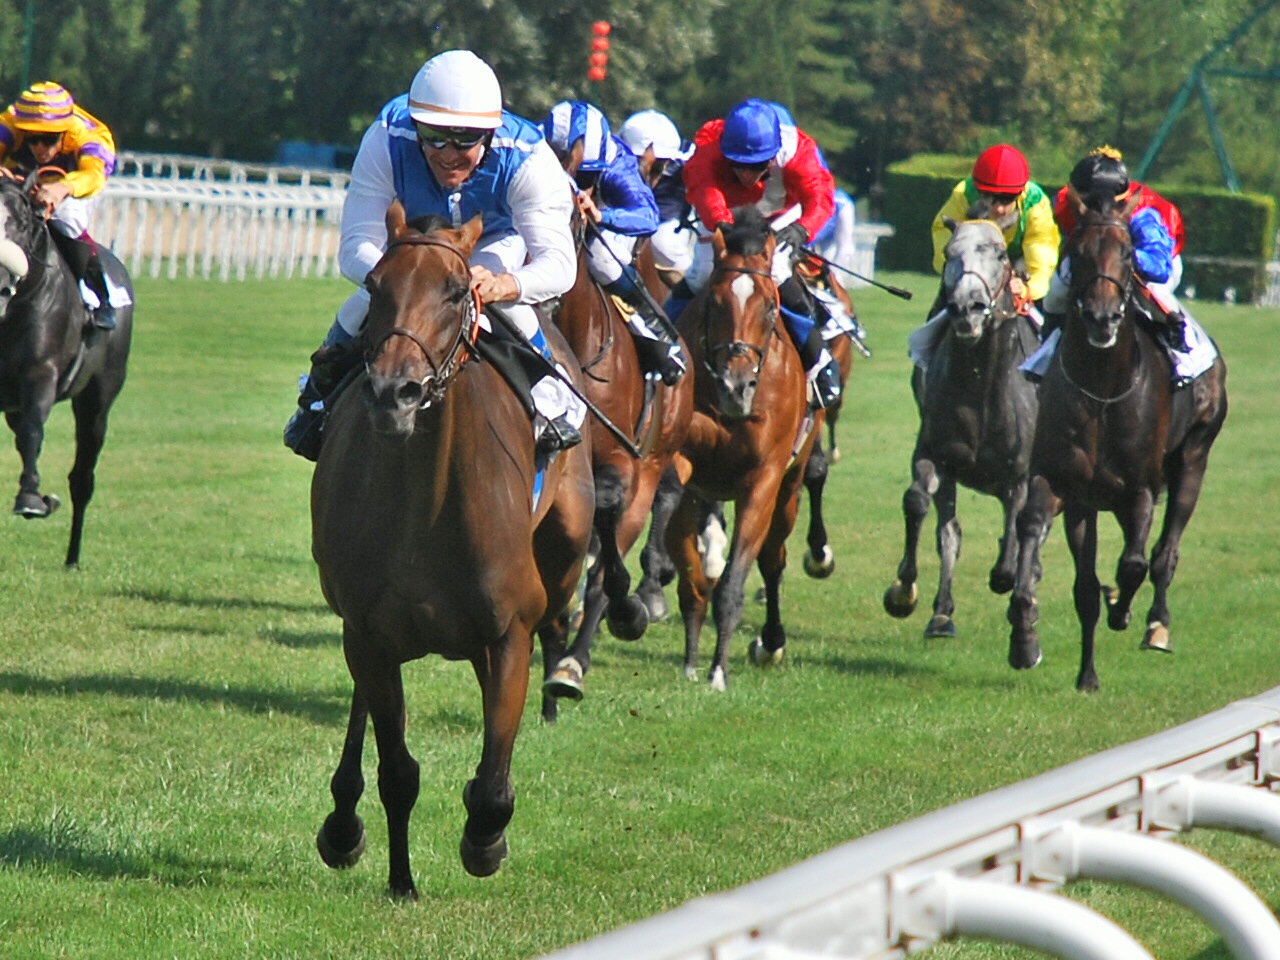 Whoosh! The victory that had all racing buzzing - Goldikova winning the 2009 Prix Jacques le Marois at Deauville by six lengths. Photo: John Gilmore